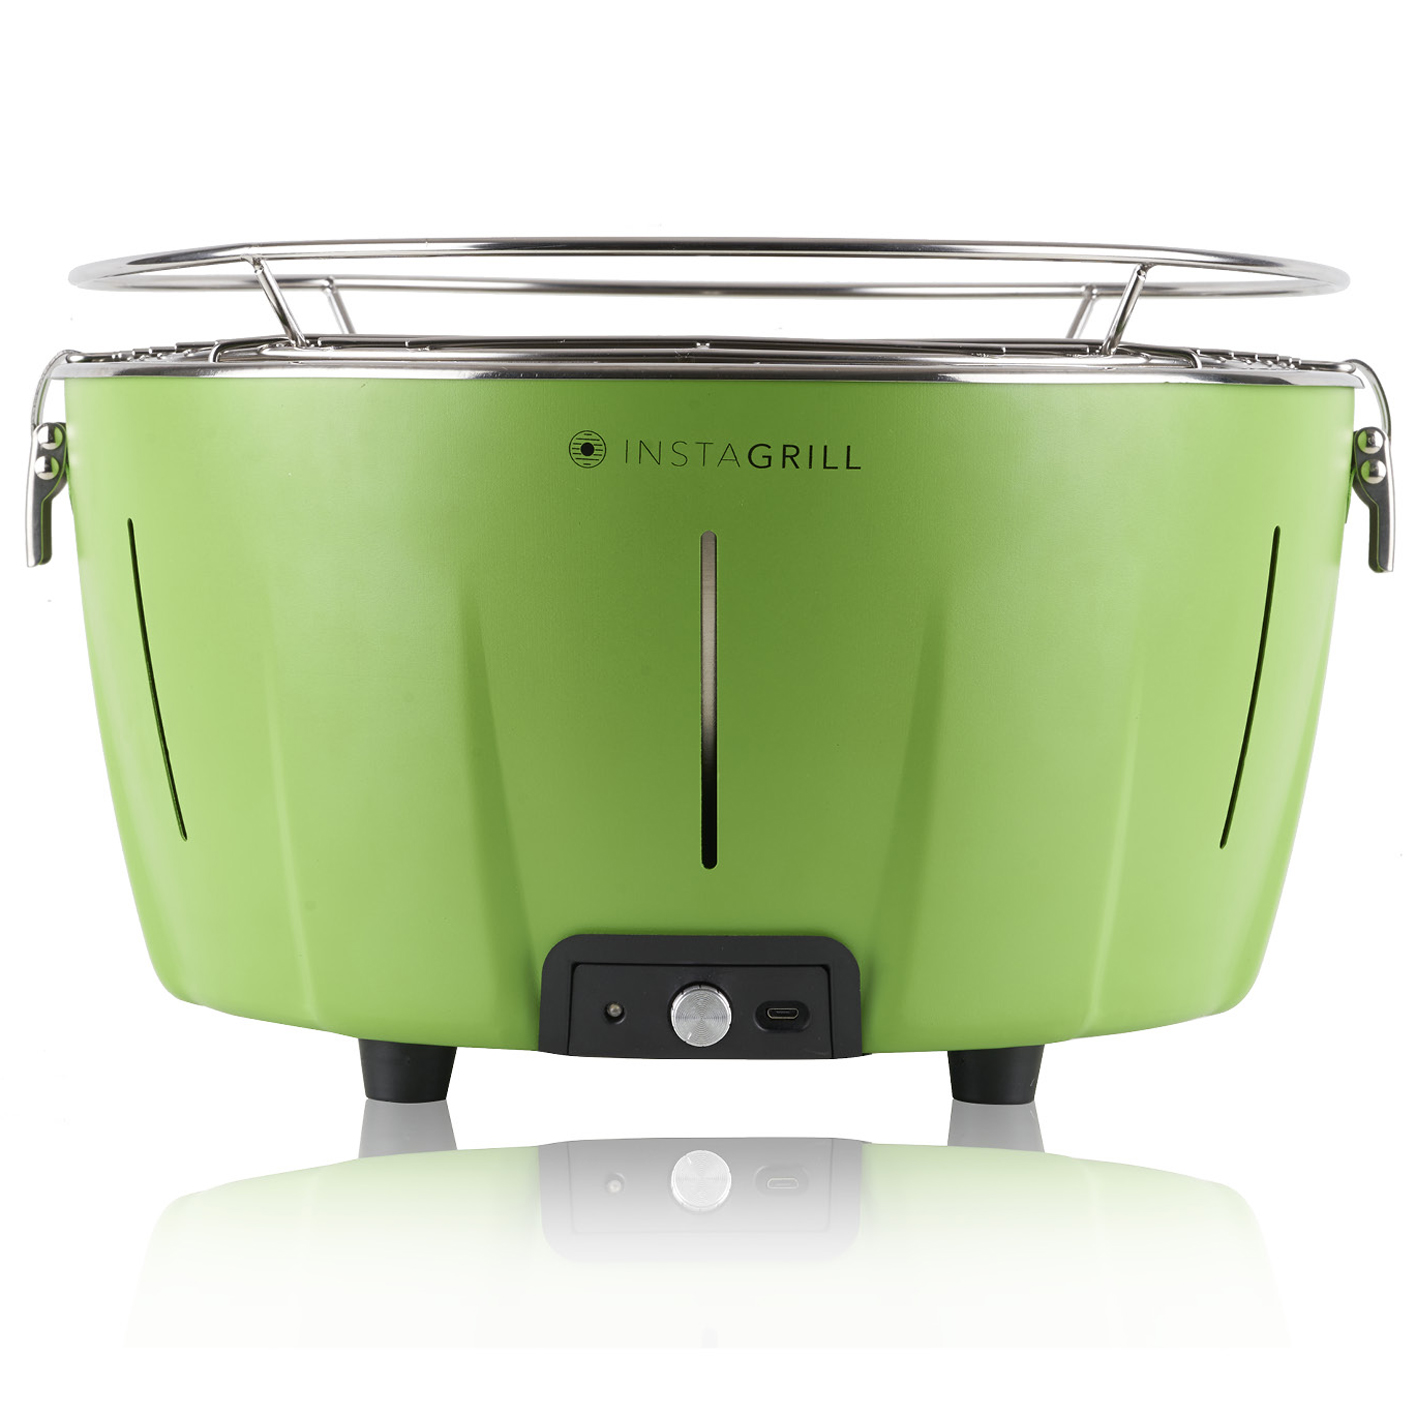 BARBECUE INSTAGRILL VERDE